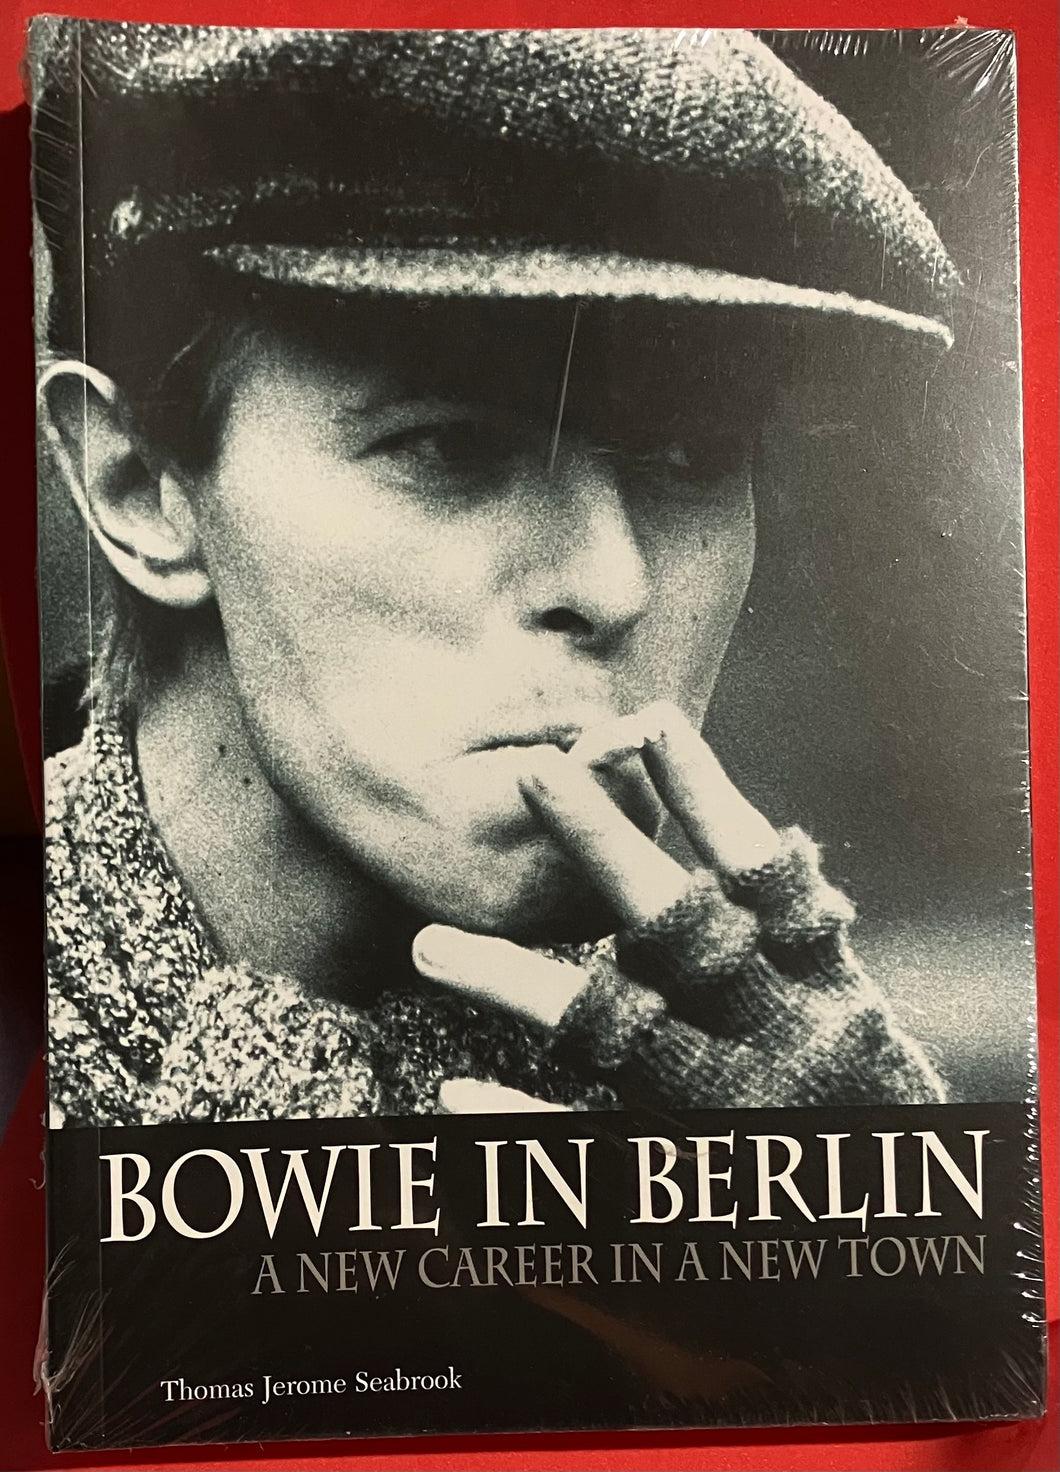 BOWIE IN BERLIN - THOMAS JEROME SEABROOK (SEALED)